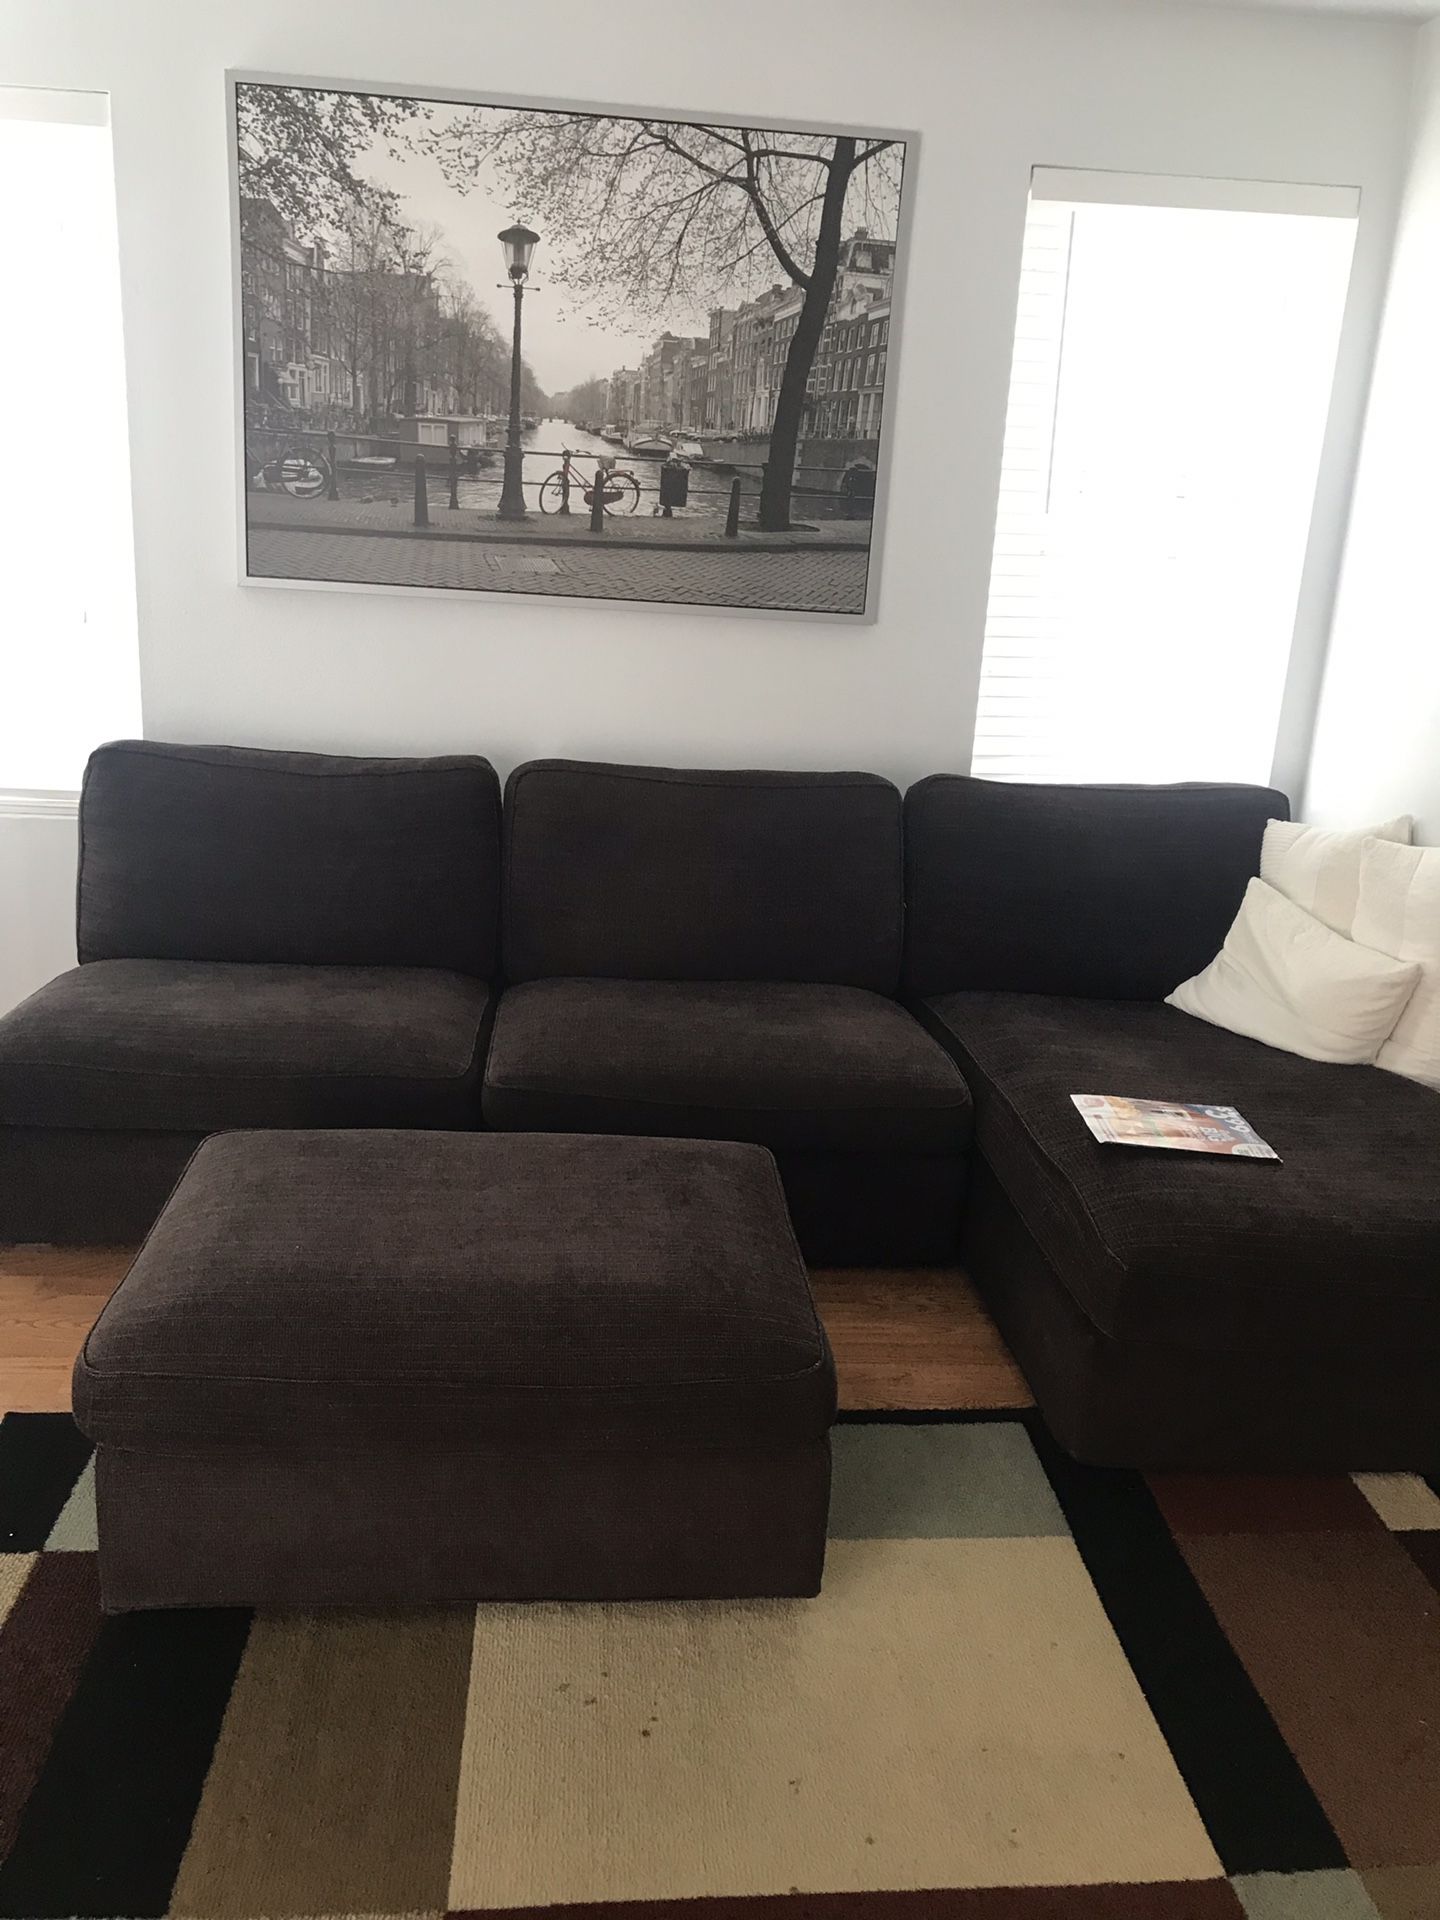 Ikea sectional couch